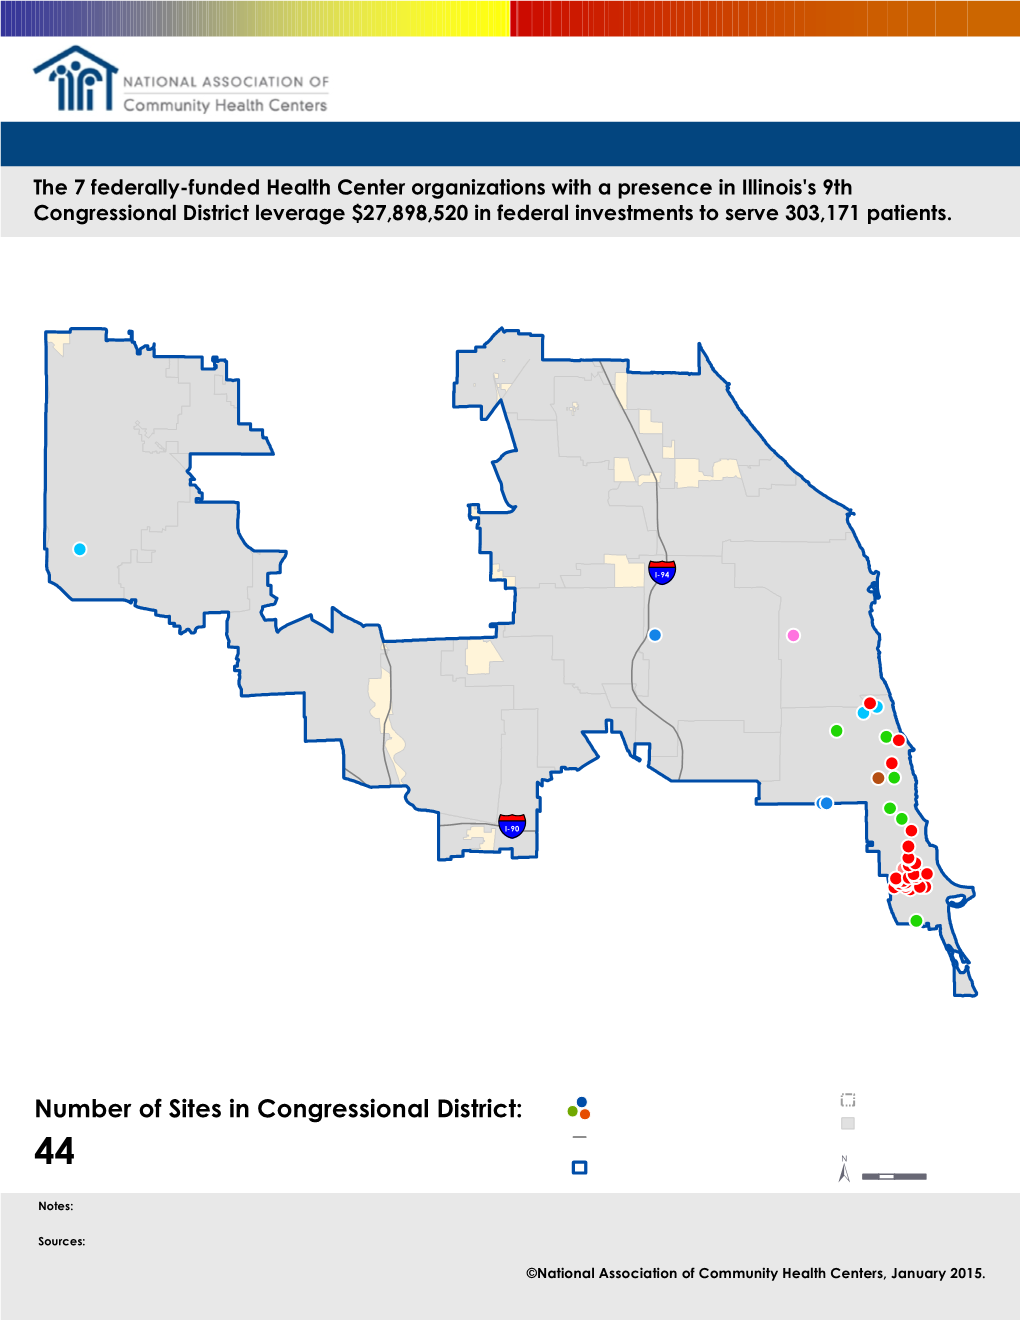 Number of Sites in Congressional District